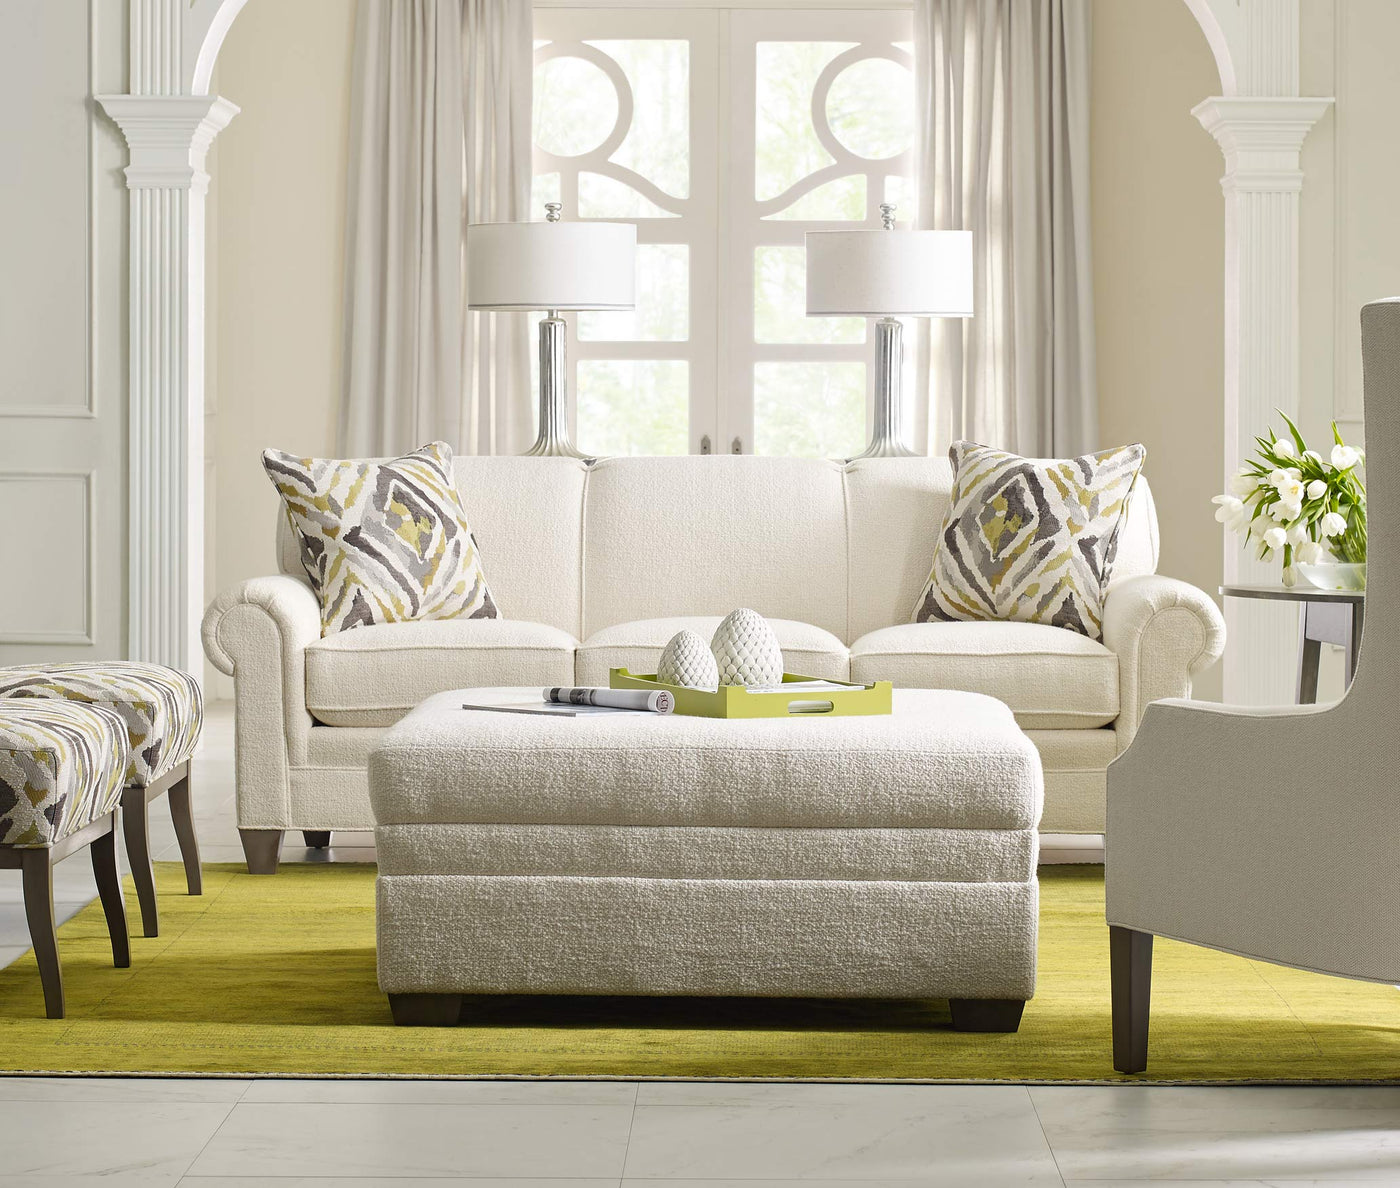 Cream colored Stickley 7000 Series sofa with white, gray, and green decorative pillows and ottoman with a light green rug underneath